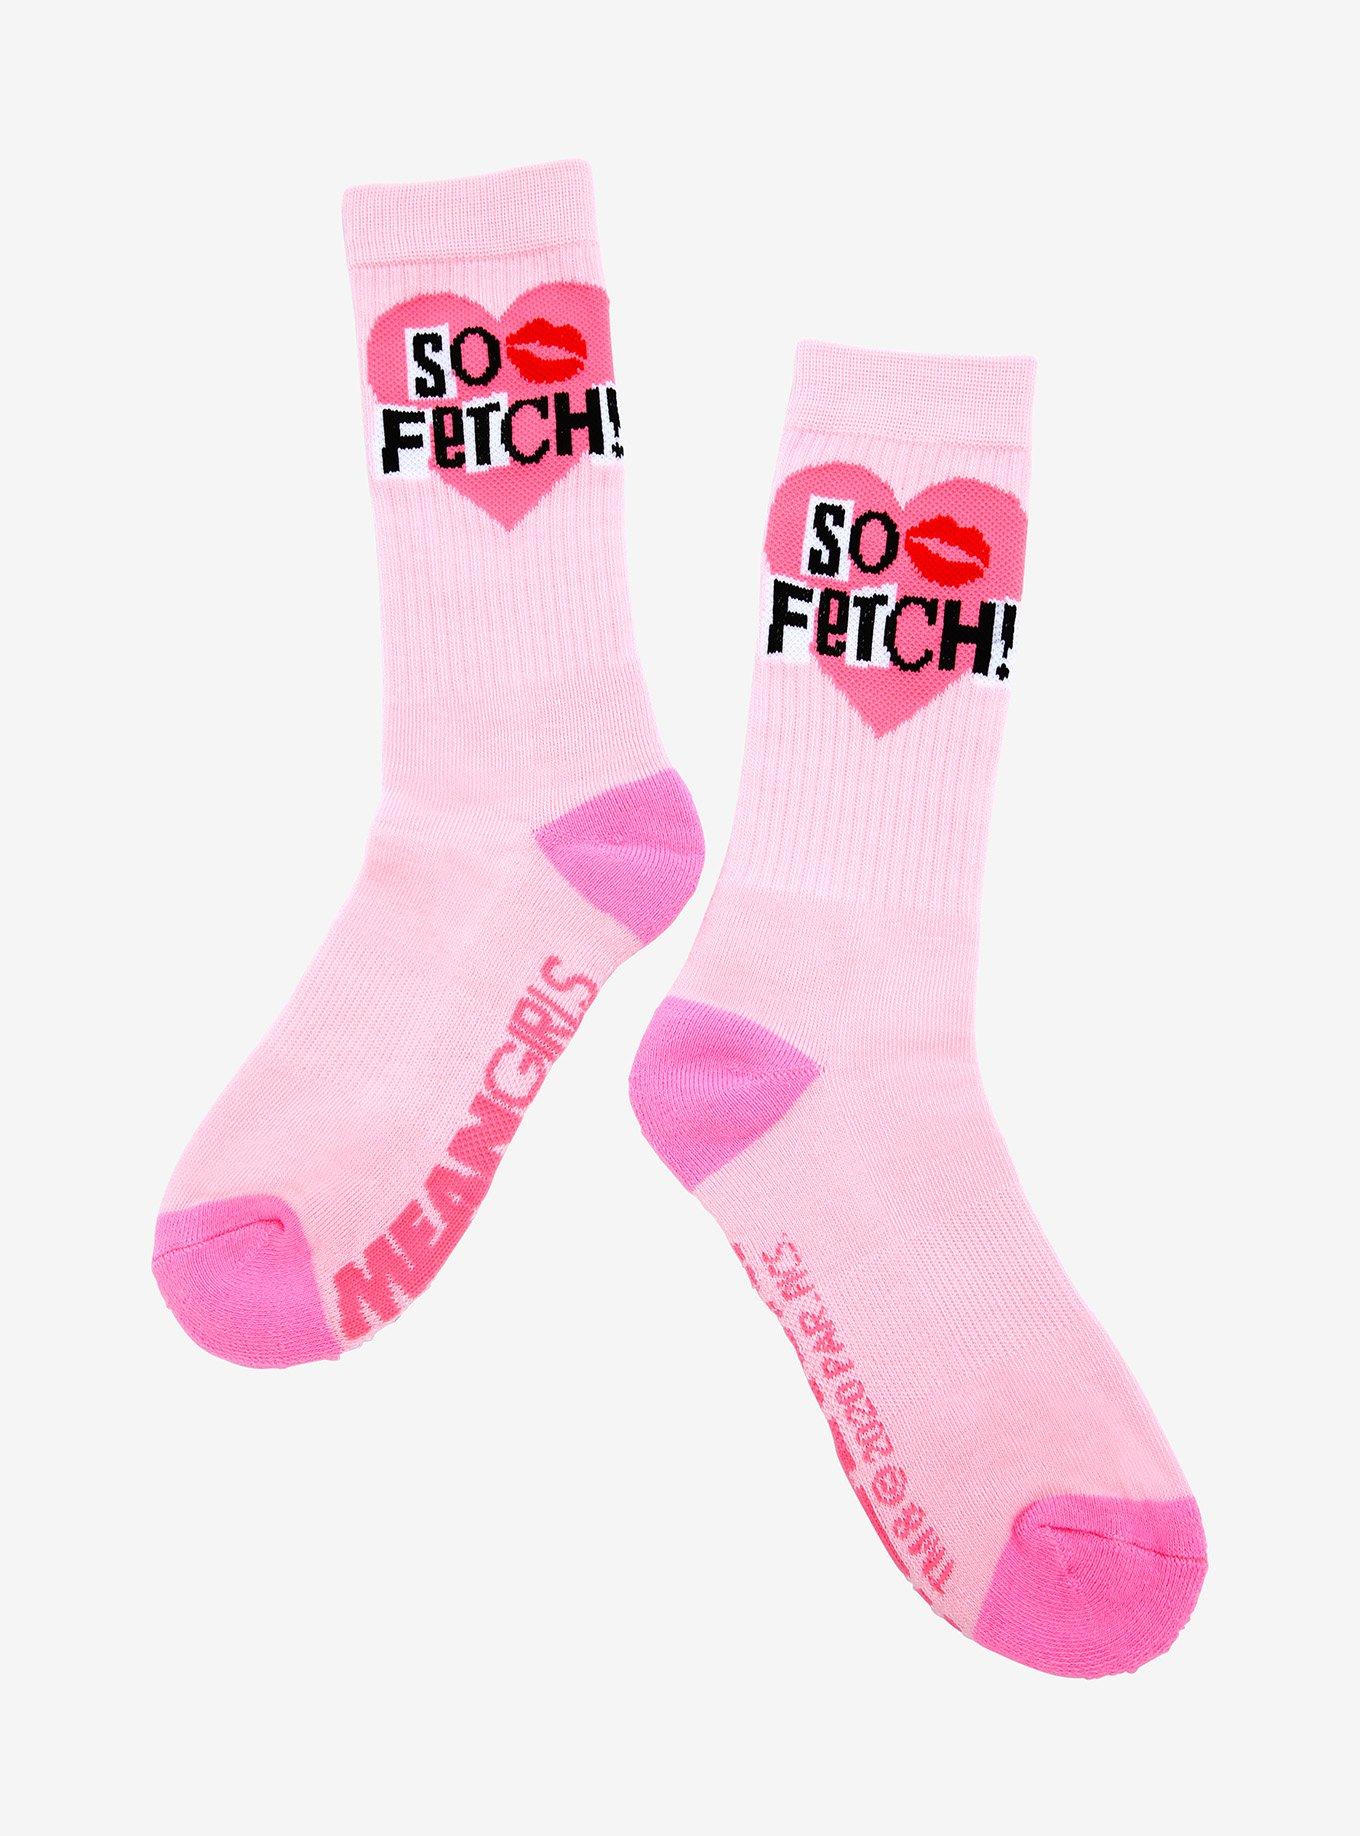 Mean Girls Movie No Show Socks 10 Pair Pack Assorted sz 4-10 Womens NWT